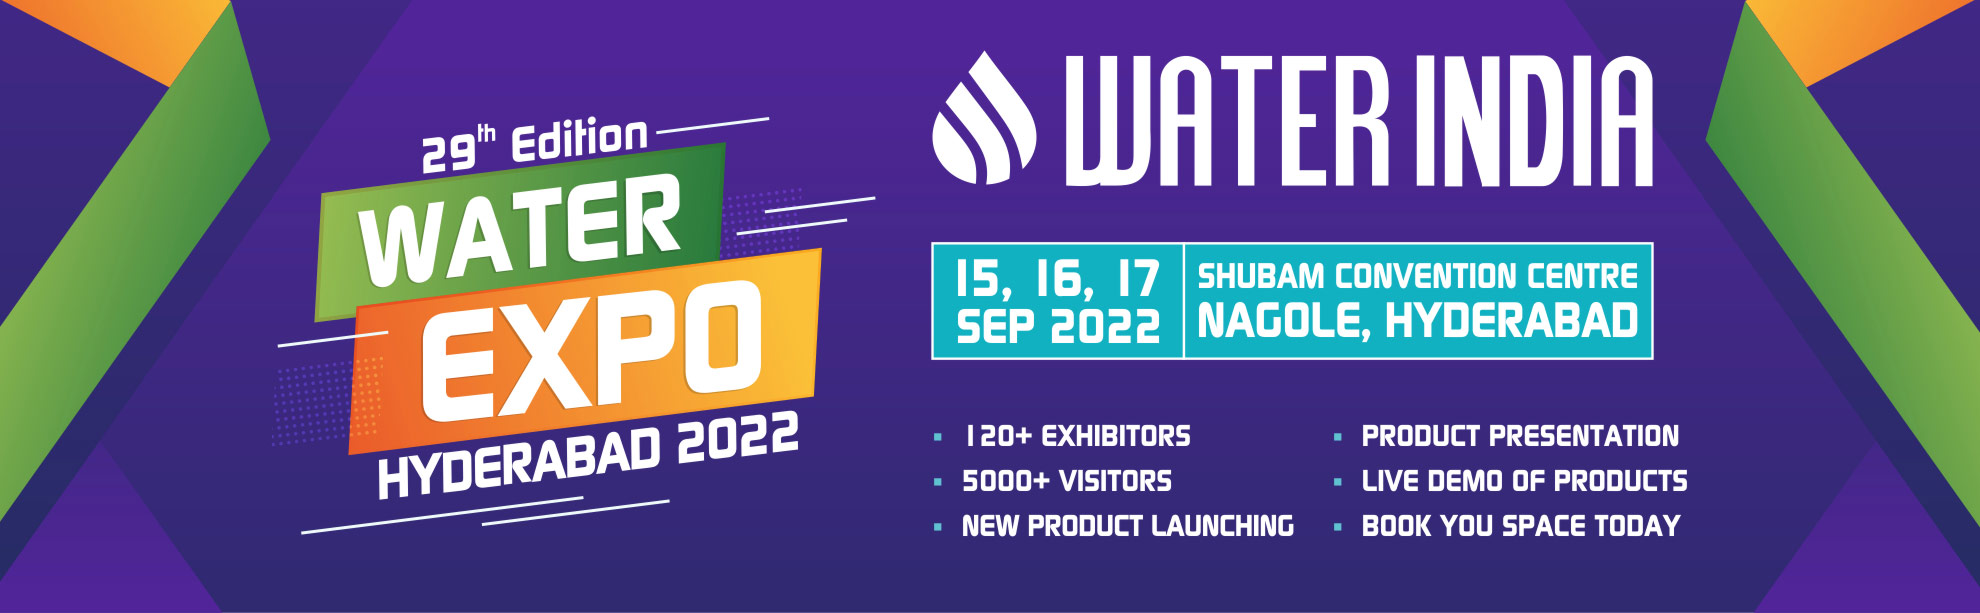 WATER INDIA - WATER EXPO- Hyderabad 